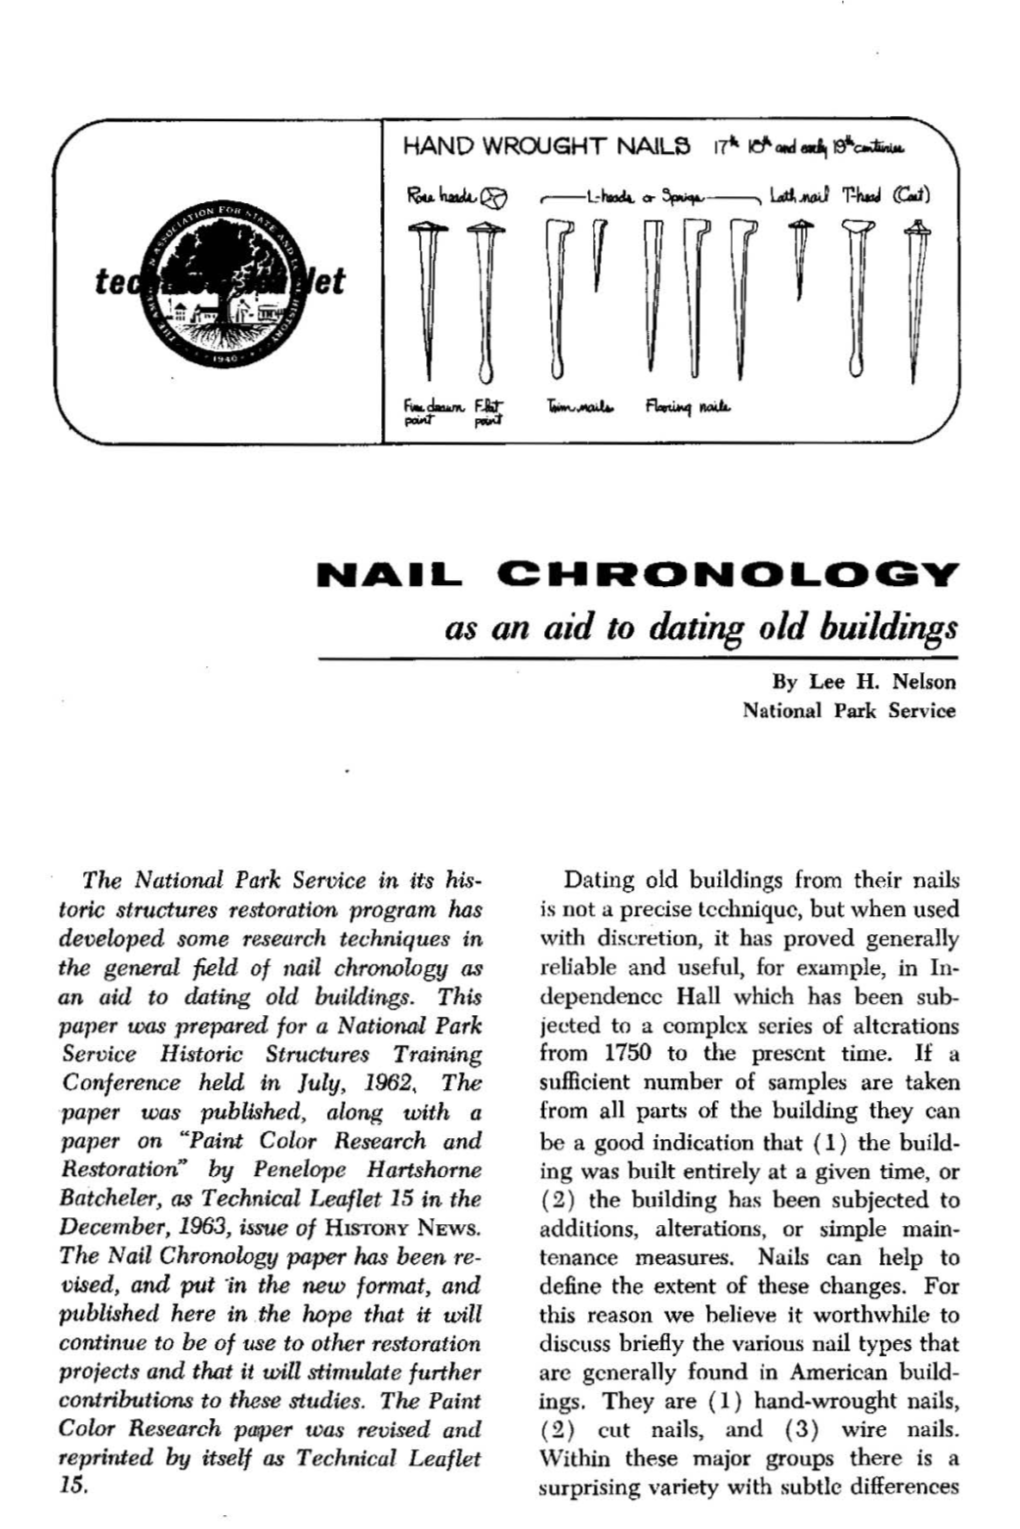 NAIL CHRONOLOGY As an Aid to Dating Old Buildings